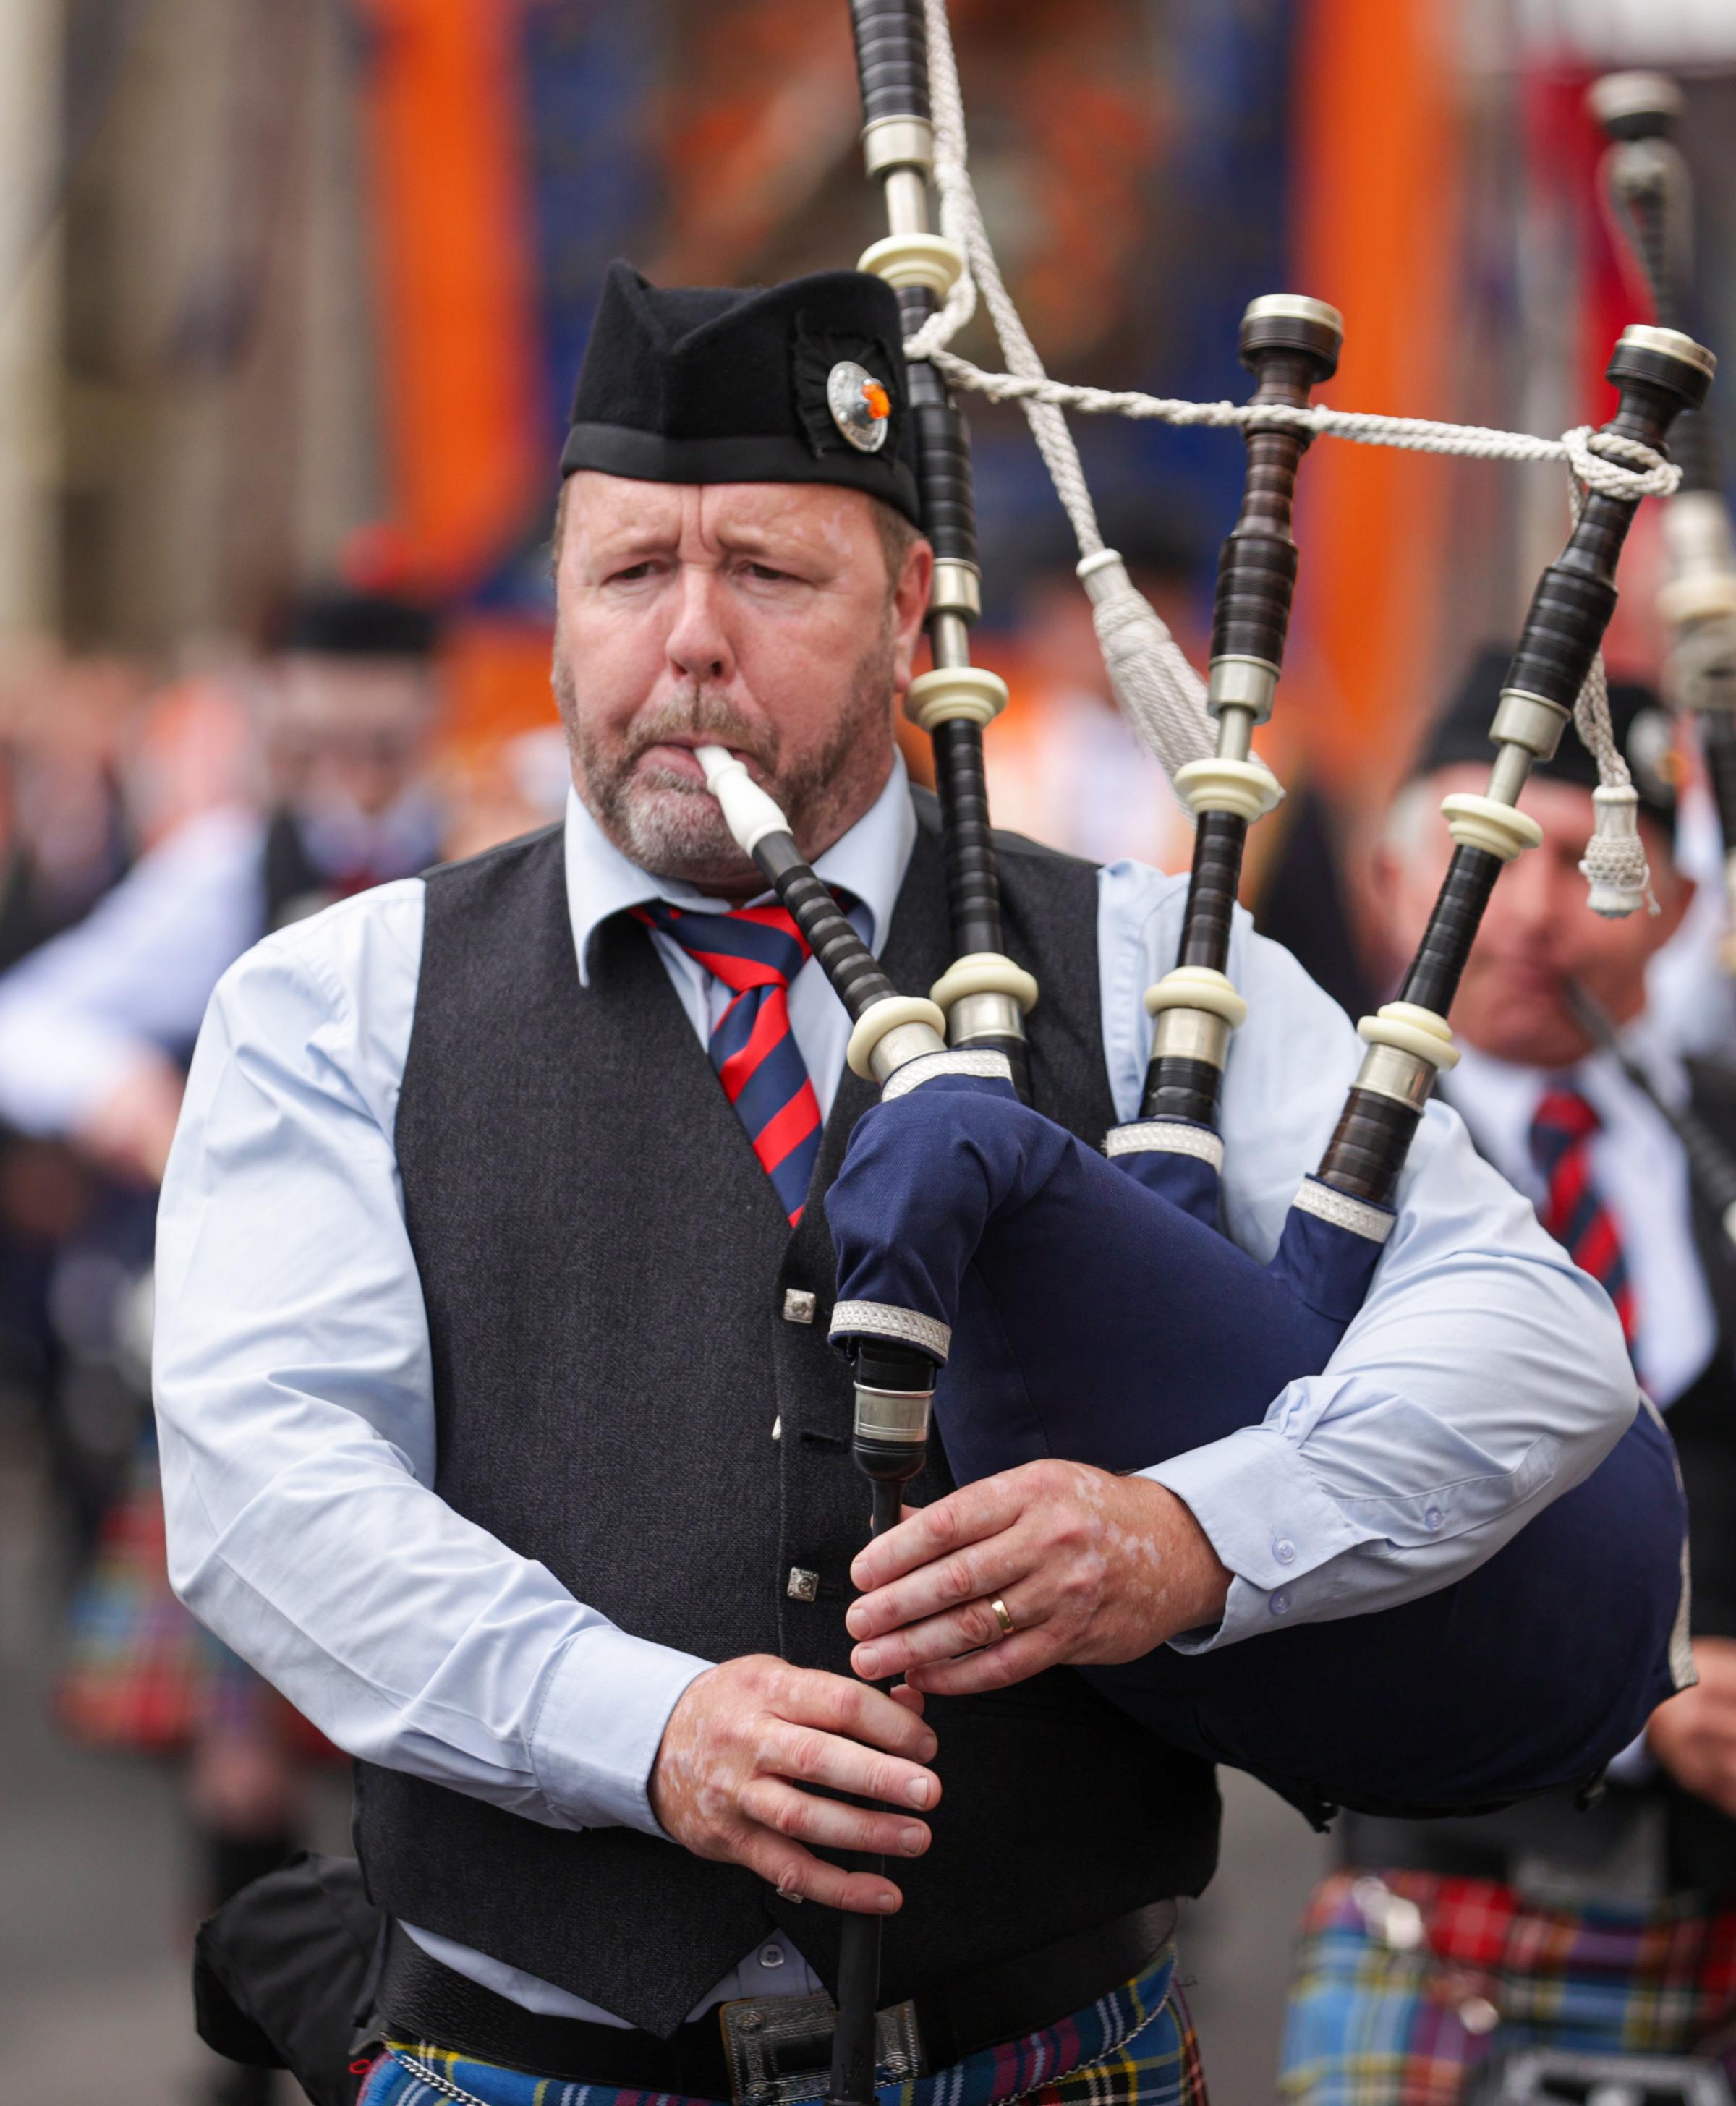 A piper with the Irvine Memorial Pipe Band during The Twelfth in Ballinamallard.